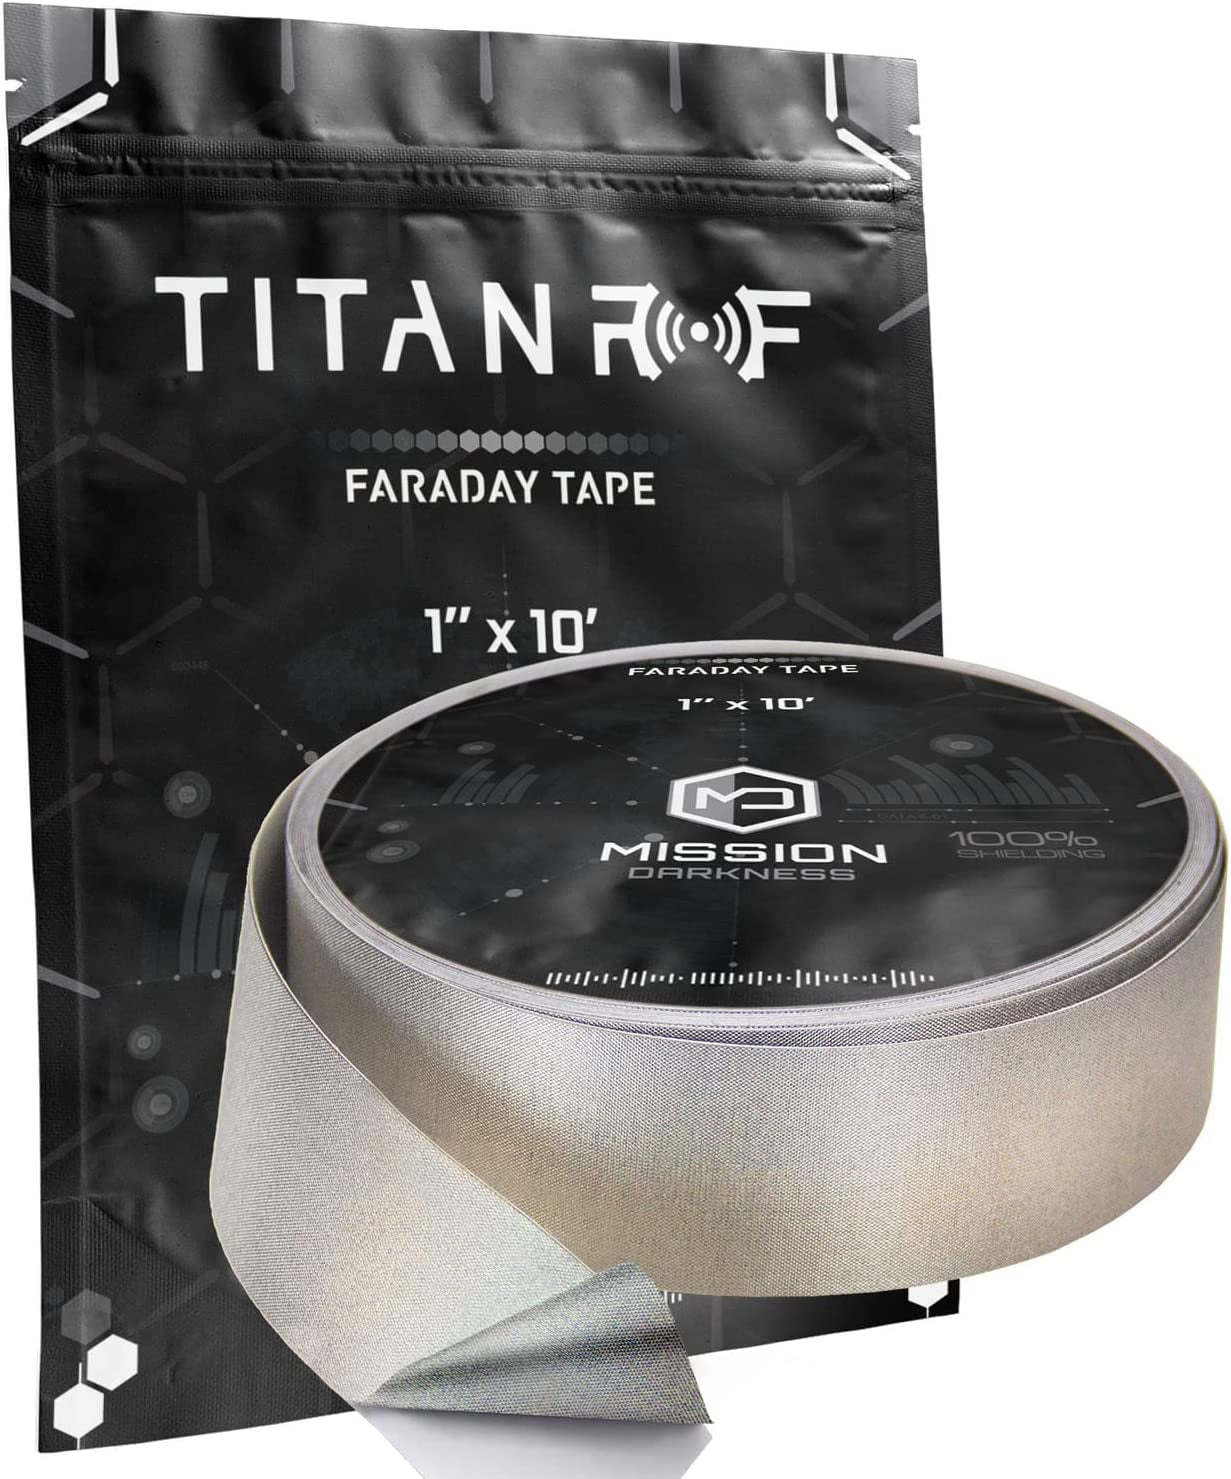 Mission Darkness, Mission Darkness Titanrf Faraday Tape // High-Shielding Conductive Adhesive Tape Roll Used to Connect Titanrf Fabric Sheets or Seal RF Enclosures // 1" W X 120" L (2.54Cm X 3.05M)